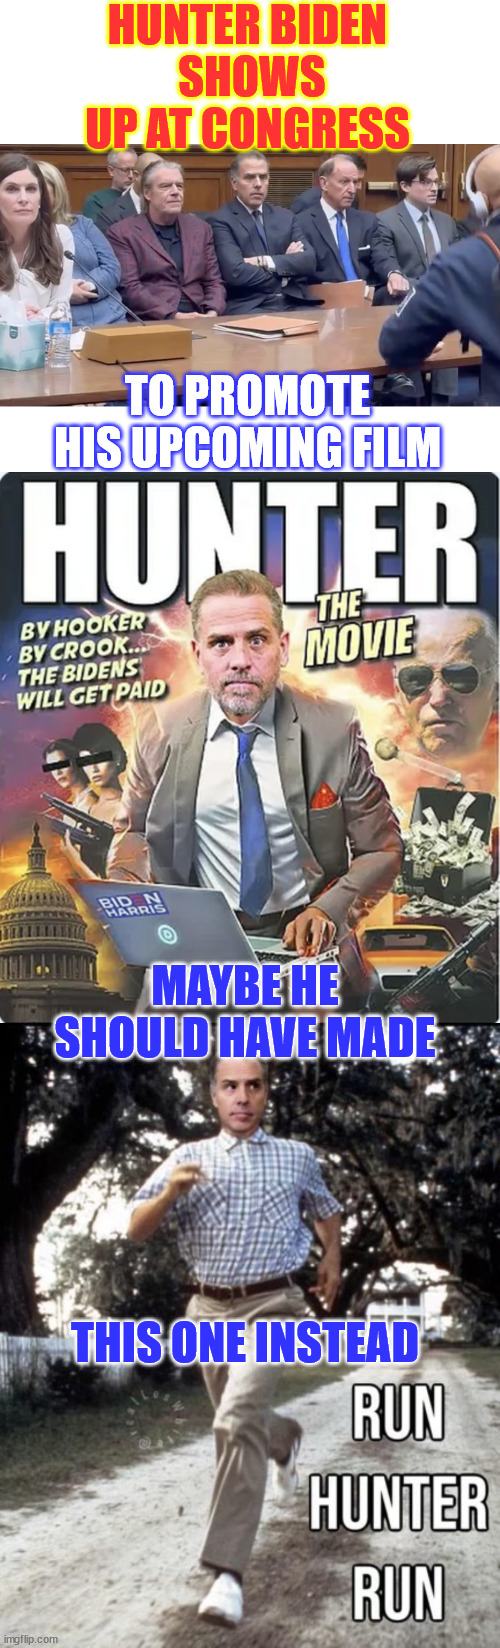 Hunter Biden pulls another PR stunt with Congress | HUNTER BIDEN
 SHOWS UP AT CONGRESS; TO PROMOTE HIS UPCOMING FILM; MAYBE HE SHOULD HAVE MADE; THIS ONE INSTEAD | image tagged in hunter biden,pr stunt,for his upcoming documentary | made w/ Imgflip meme maker